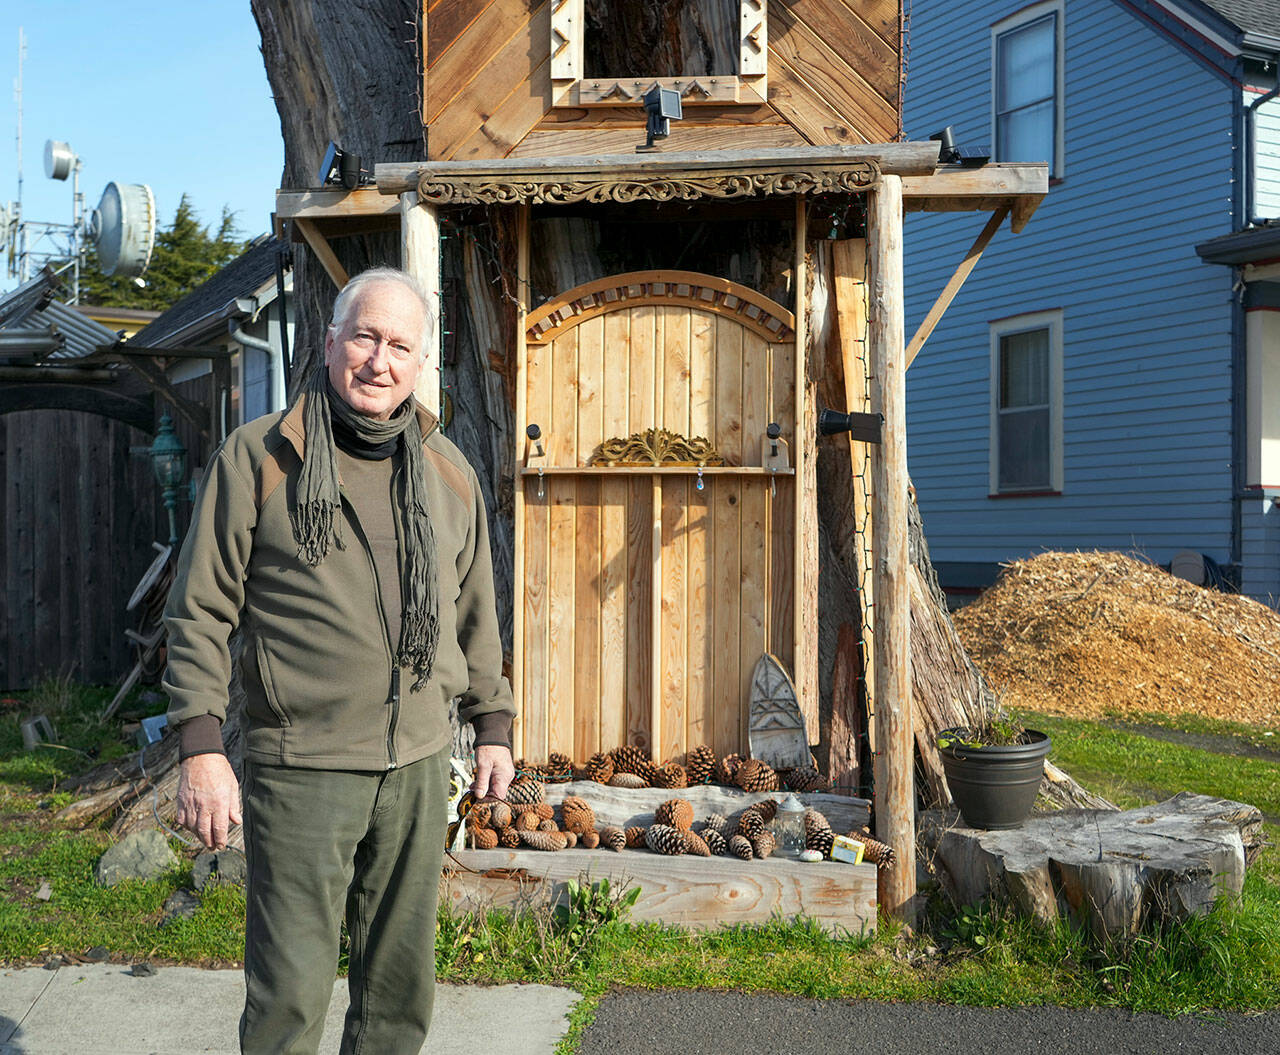 Port Townsend Uptown resident Kevin Mason stands in the Friday morning sunlight beside his art structure known as “Raccoon Lodge,” a non-inhabitable facade constructed on the side of a 160 year old Monterey Cypress tree that cracked and broke onto the street a few years ago. Mason is involved in discussions with the city over a public right of way issue because the base of the sculpture is within a few inches of the public sidewalk. (Steve Mullensky/for Peninsula Daily News)